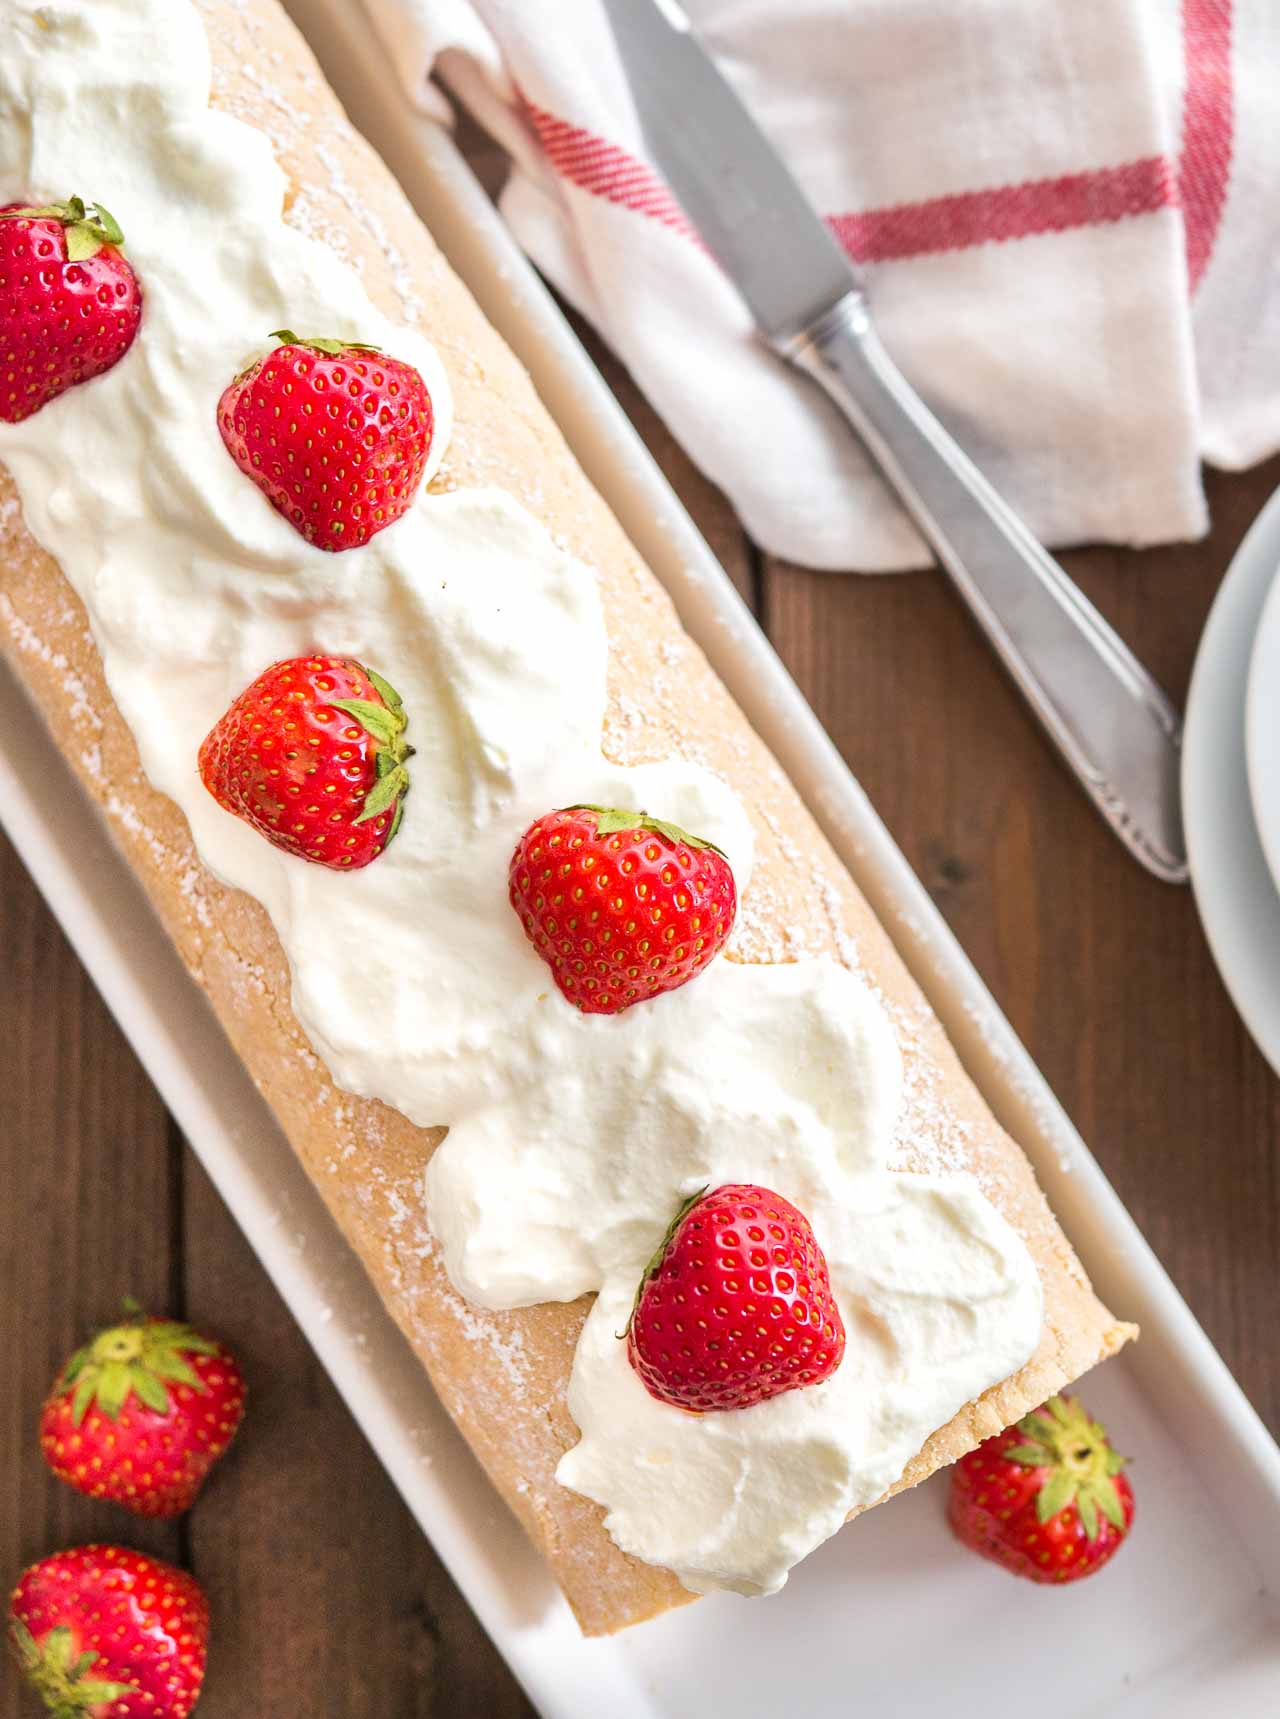 Top-down shot of a strawberry swiss cake roll topped with whipped cream and strawberries on a rectangular serving platter. There are plates, a knife and a white and red dishtowel next to it.